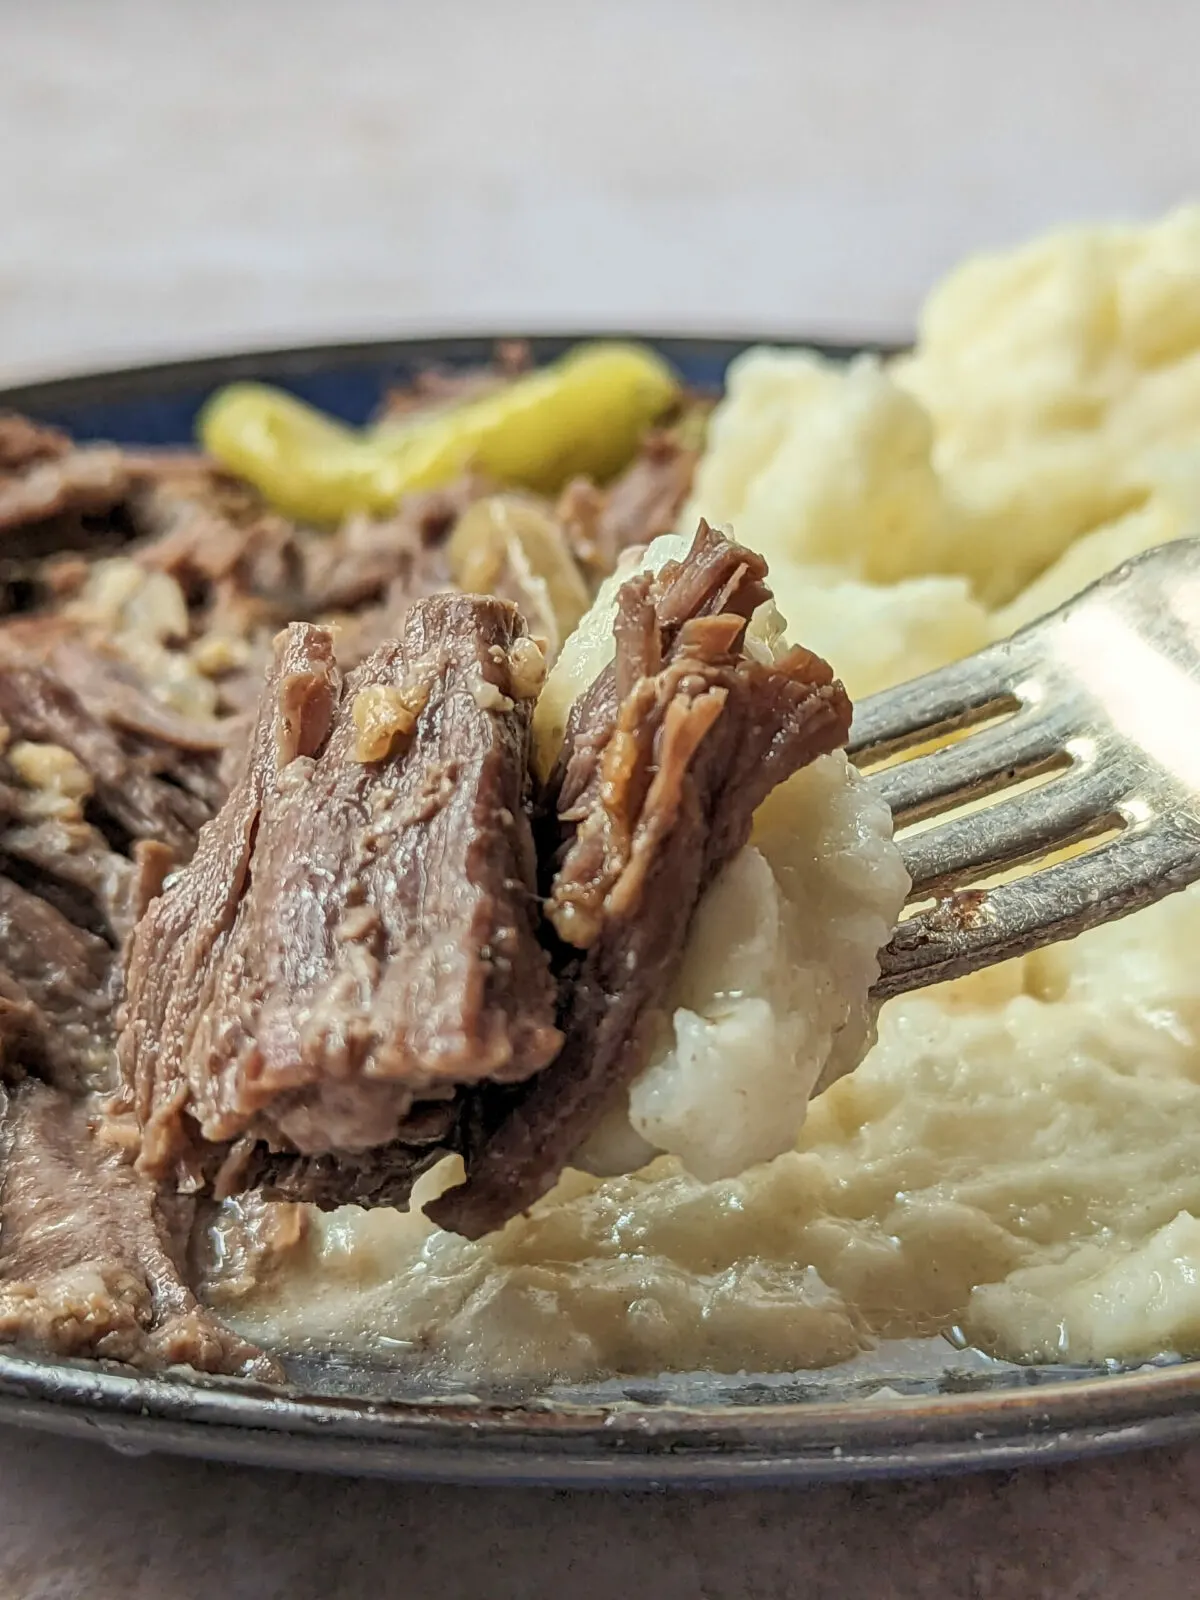 Instant pot mississippi pot roast on a fork with a side of mashed potatoes.